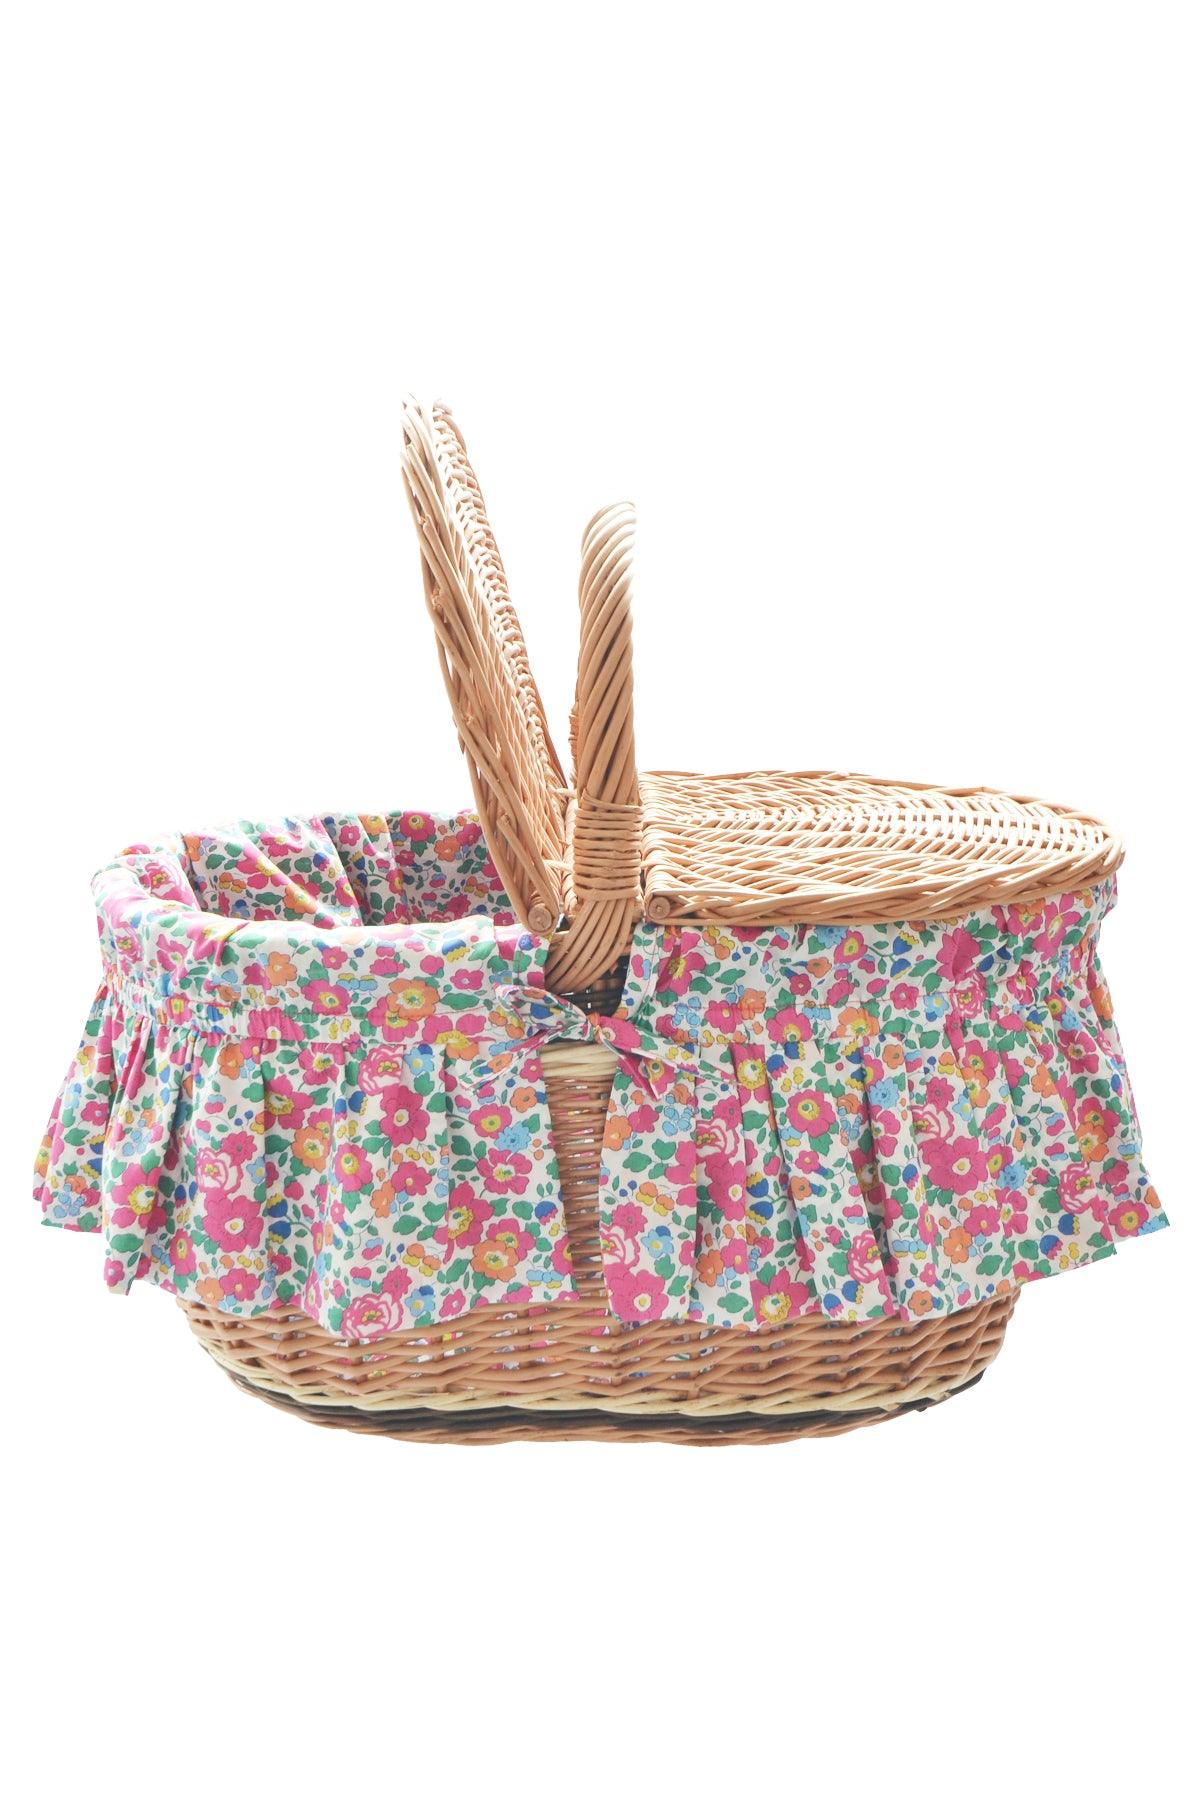 Oval Wicker Picnic Basket BETSY PINK - Coco & Wolf